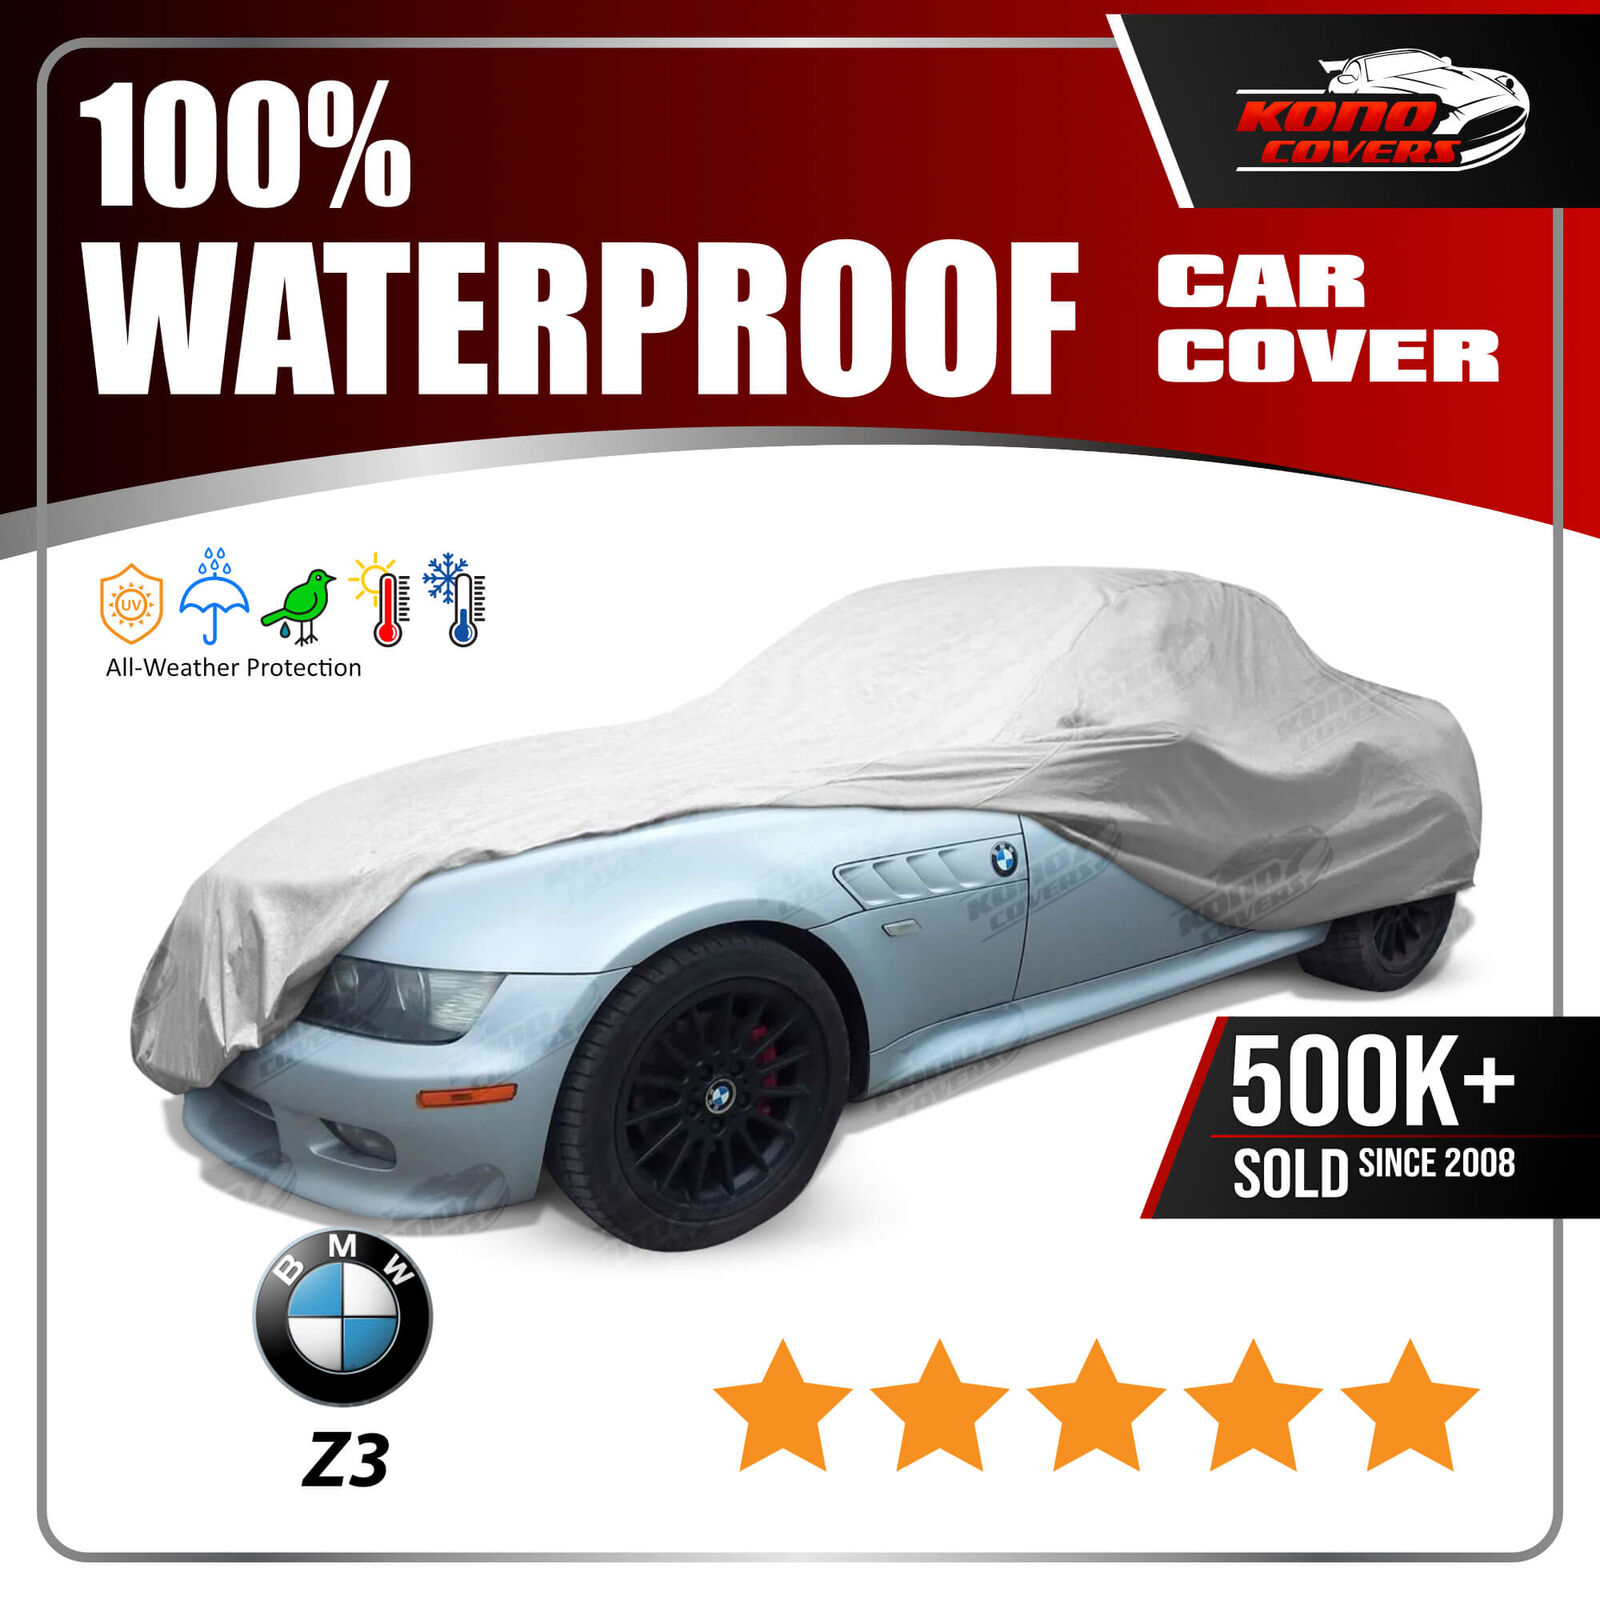 BMW Z3 1996-2002 CAR COVER - 100% Waterproof 100% Breathable